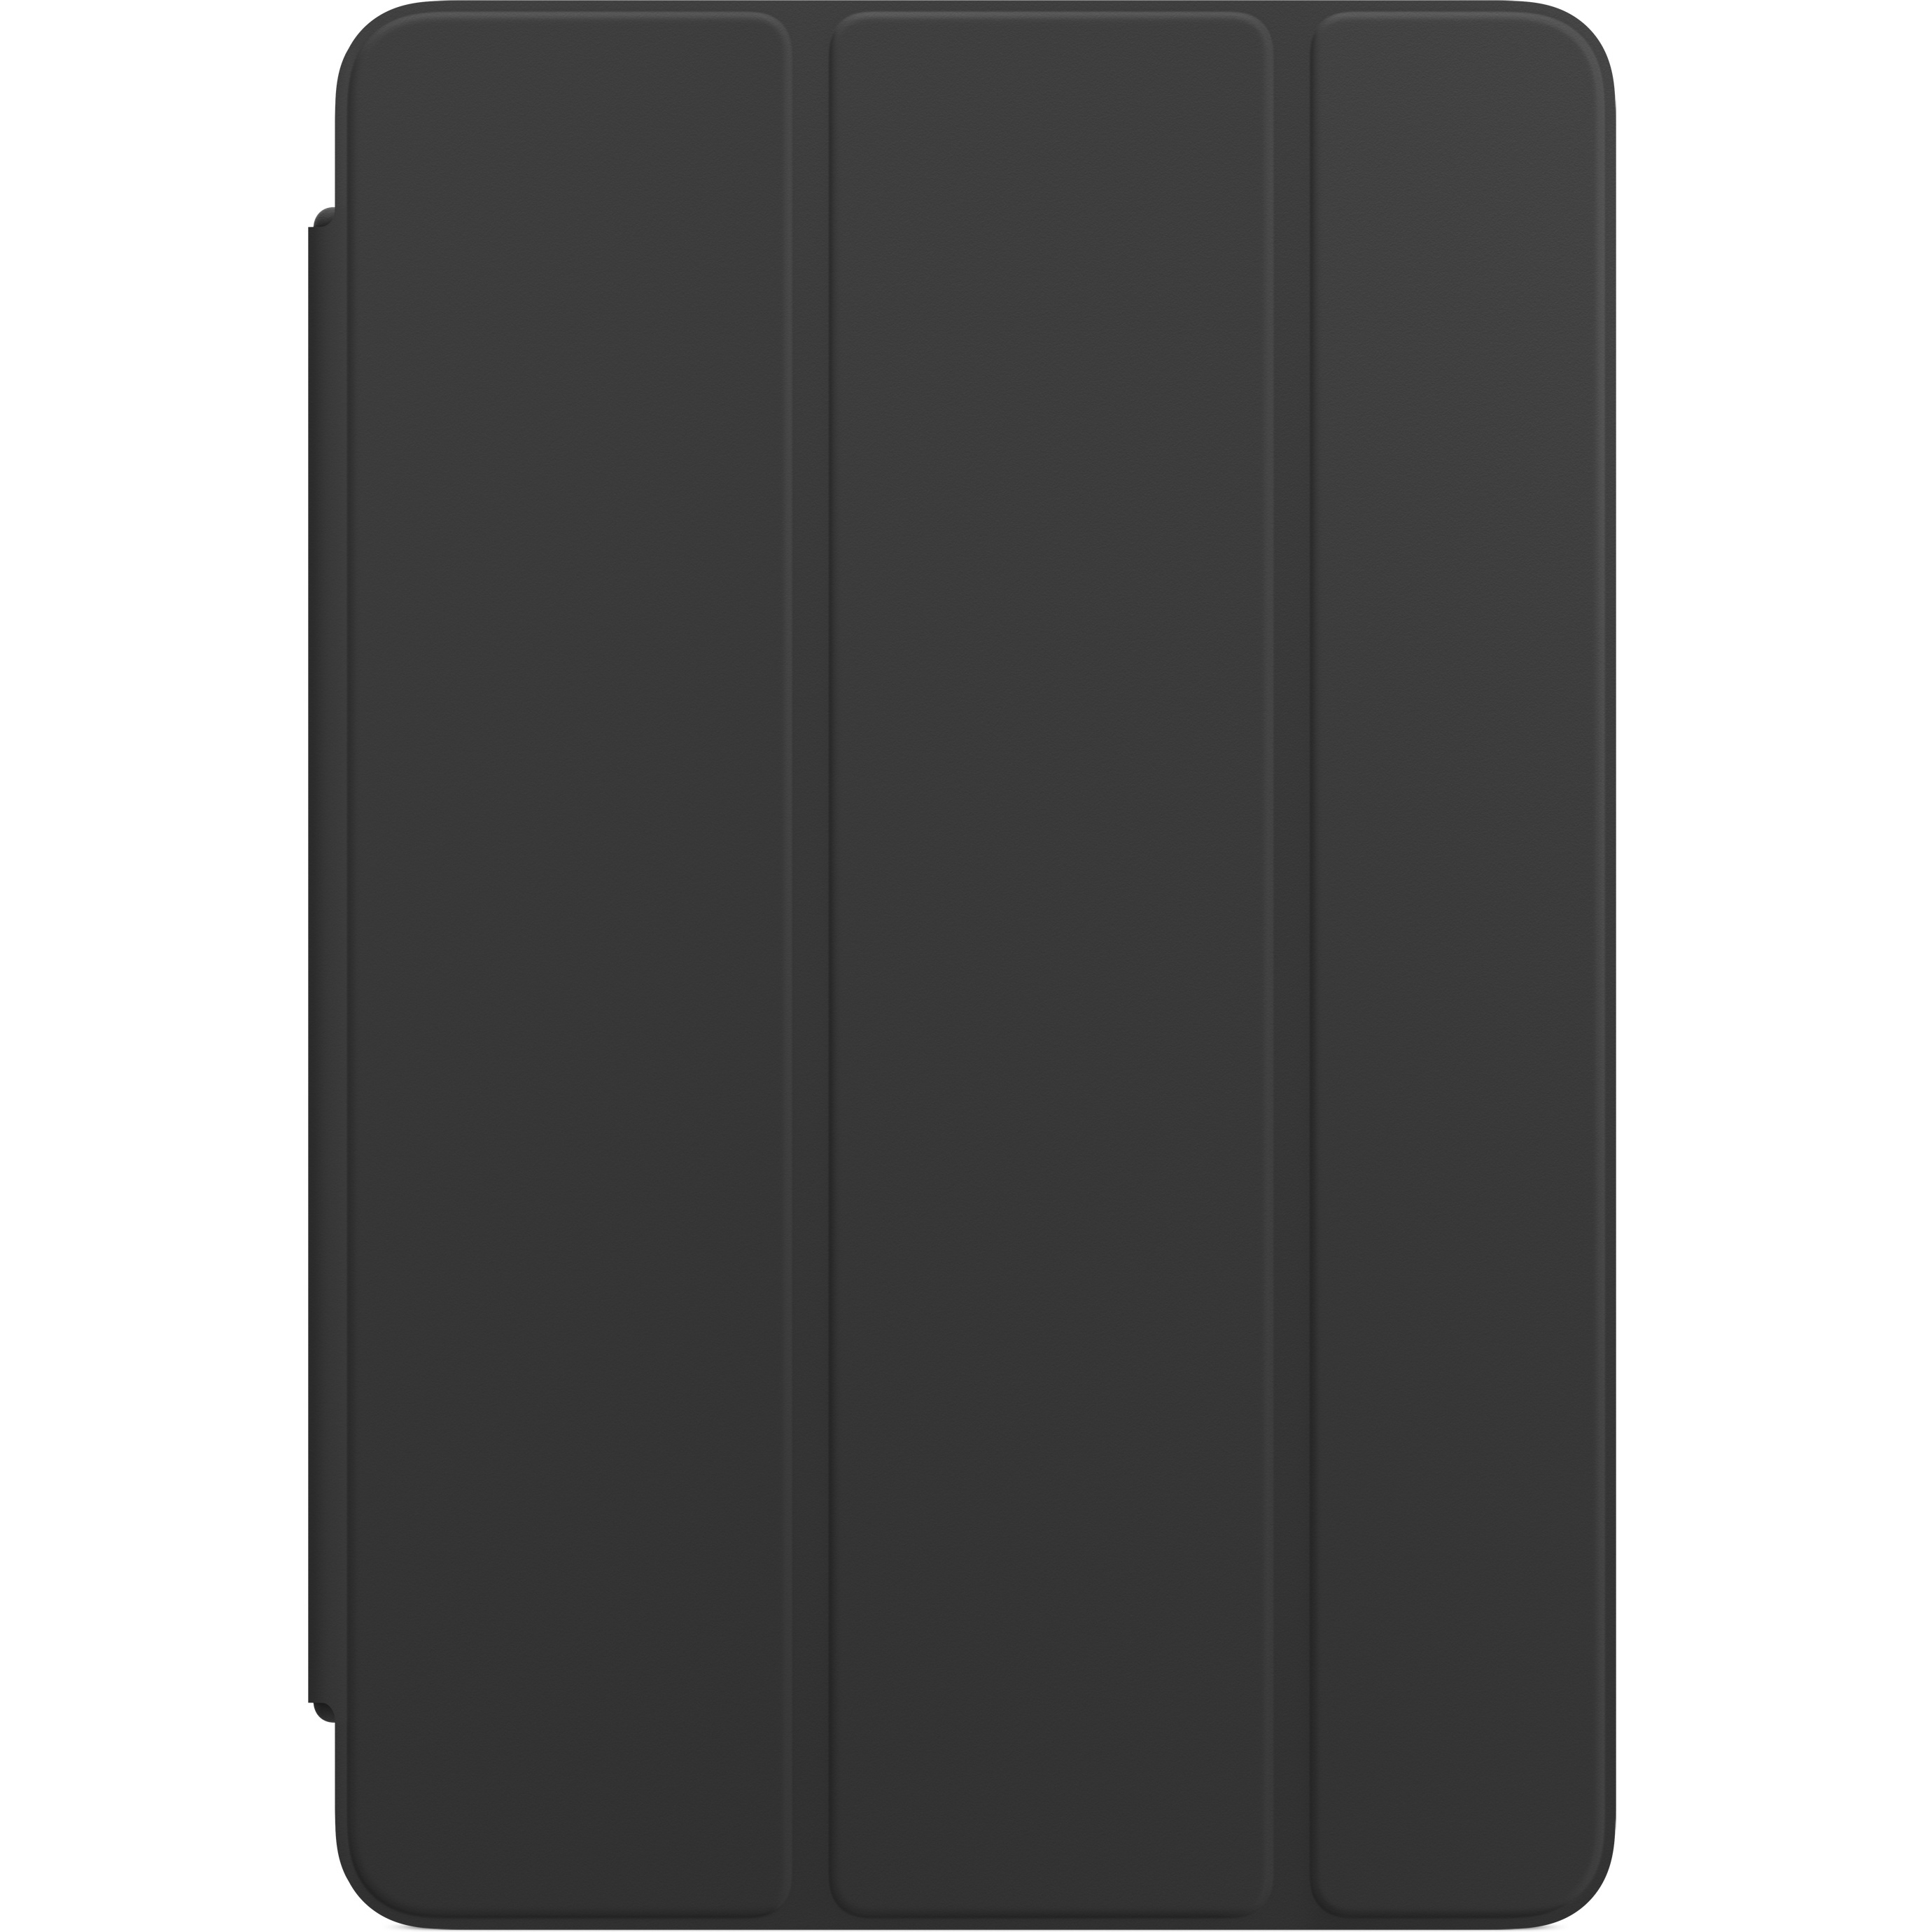 Smart Case for Apple iPad Pro 10.5 (2017), Charcoal Grey MQ082ZM/A